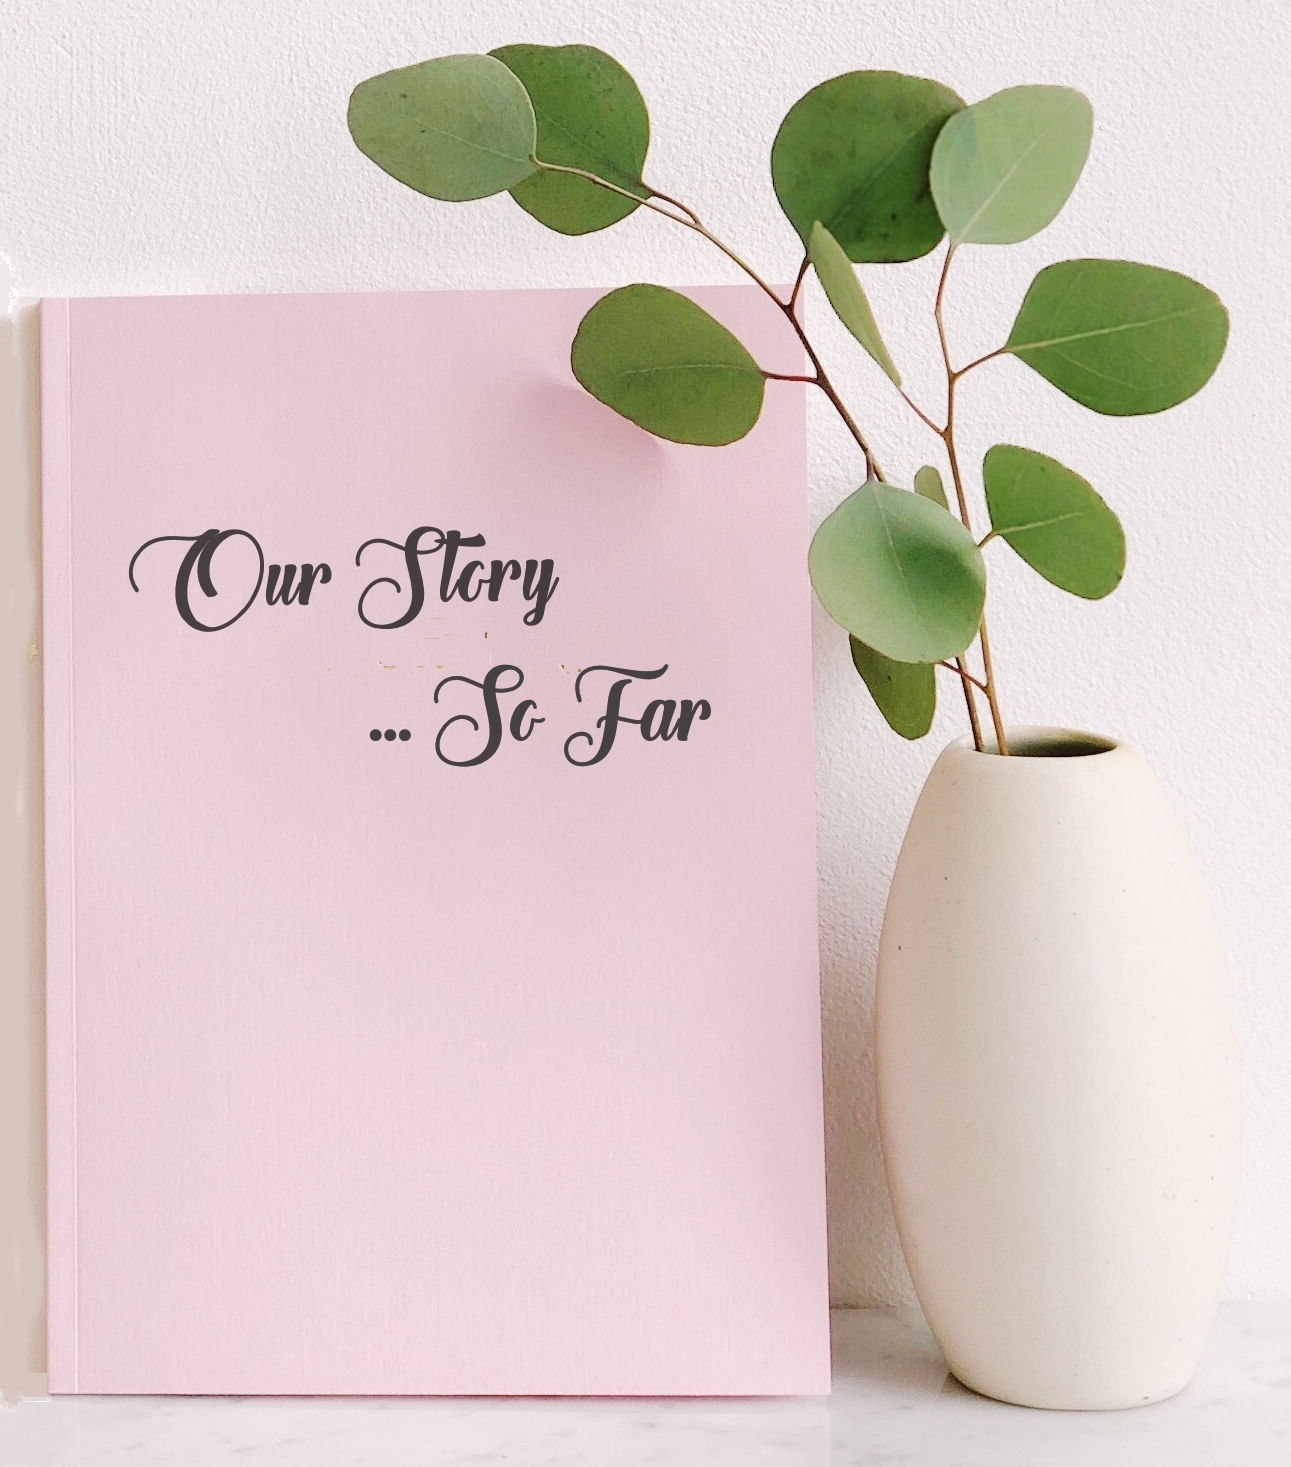 Pink Booklet with title Our Story ... So
                          Far upright next to white vase containing
                          green eucalyptus leaves